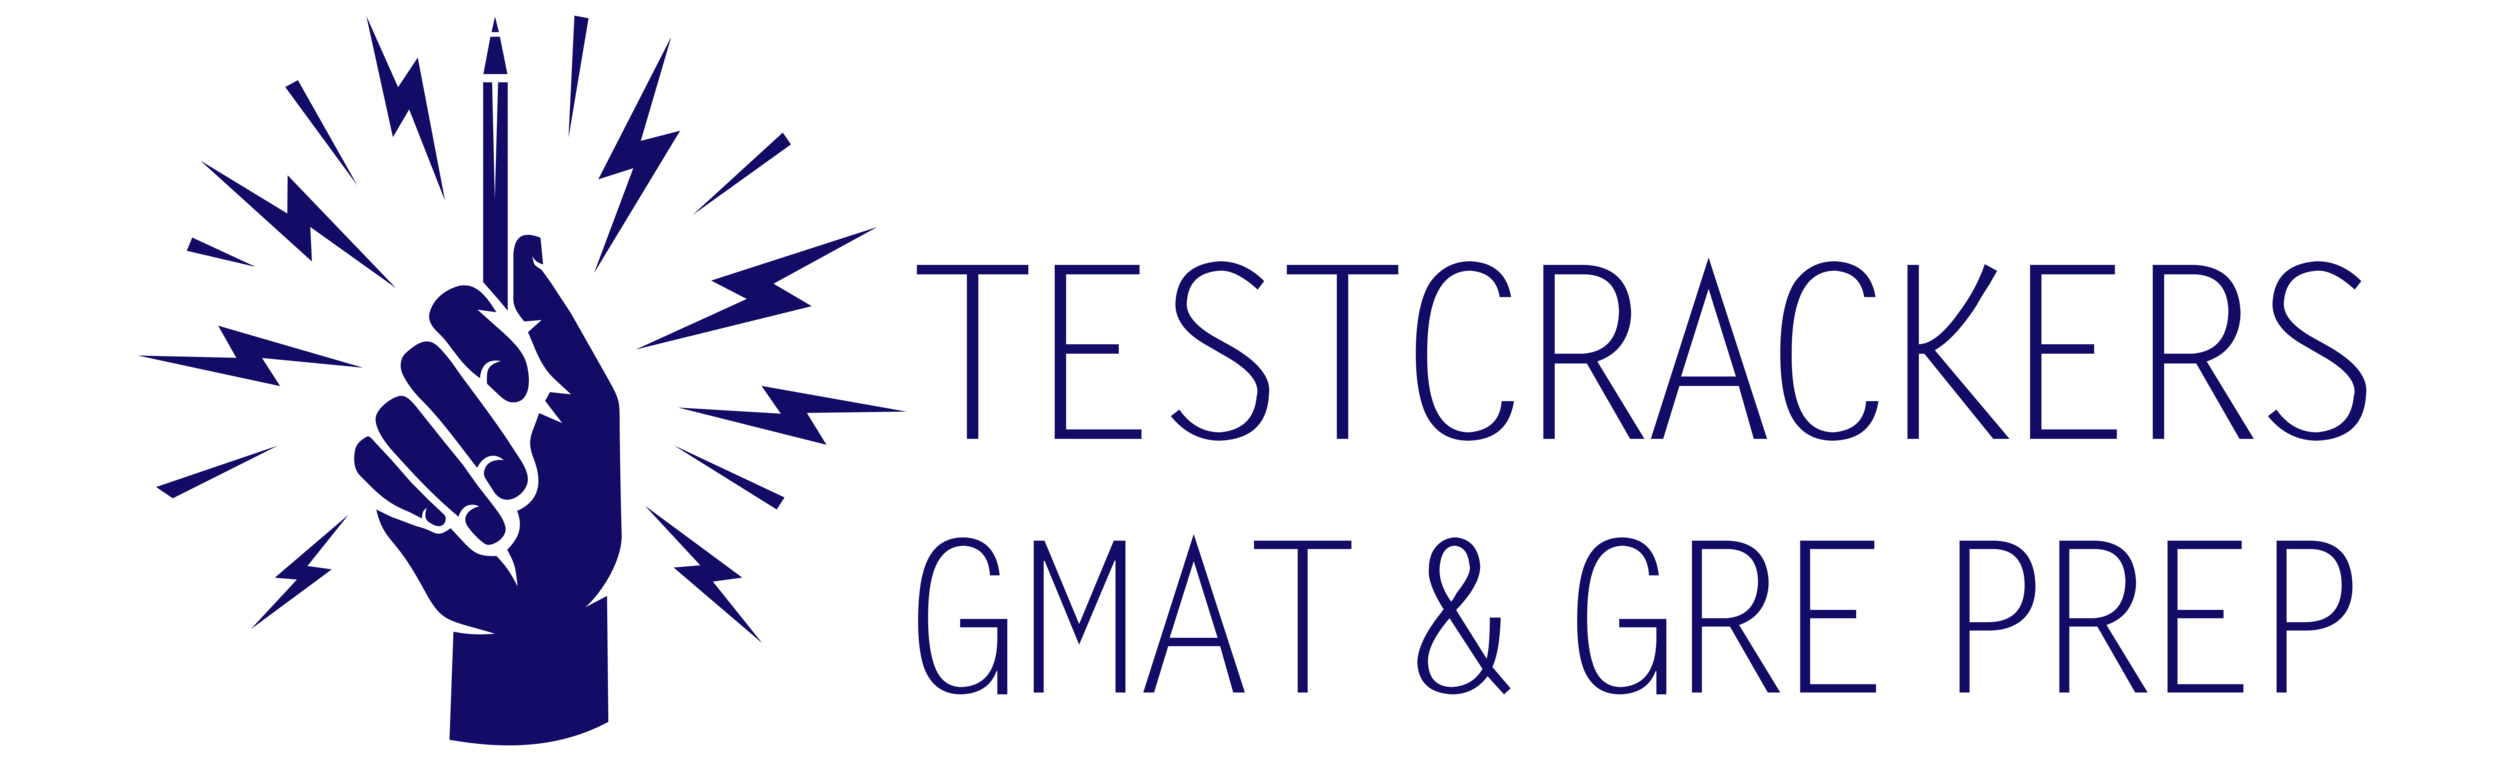 Courses　GMAT　SF-Based　Study　Prep　Group　GRE　Prep　TestCrackers　Small